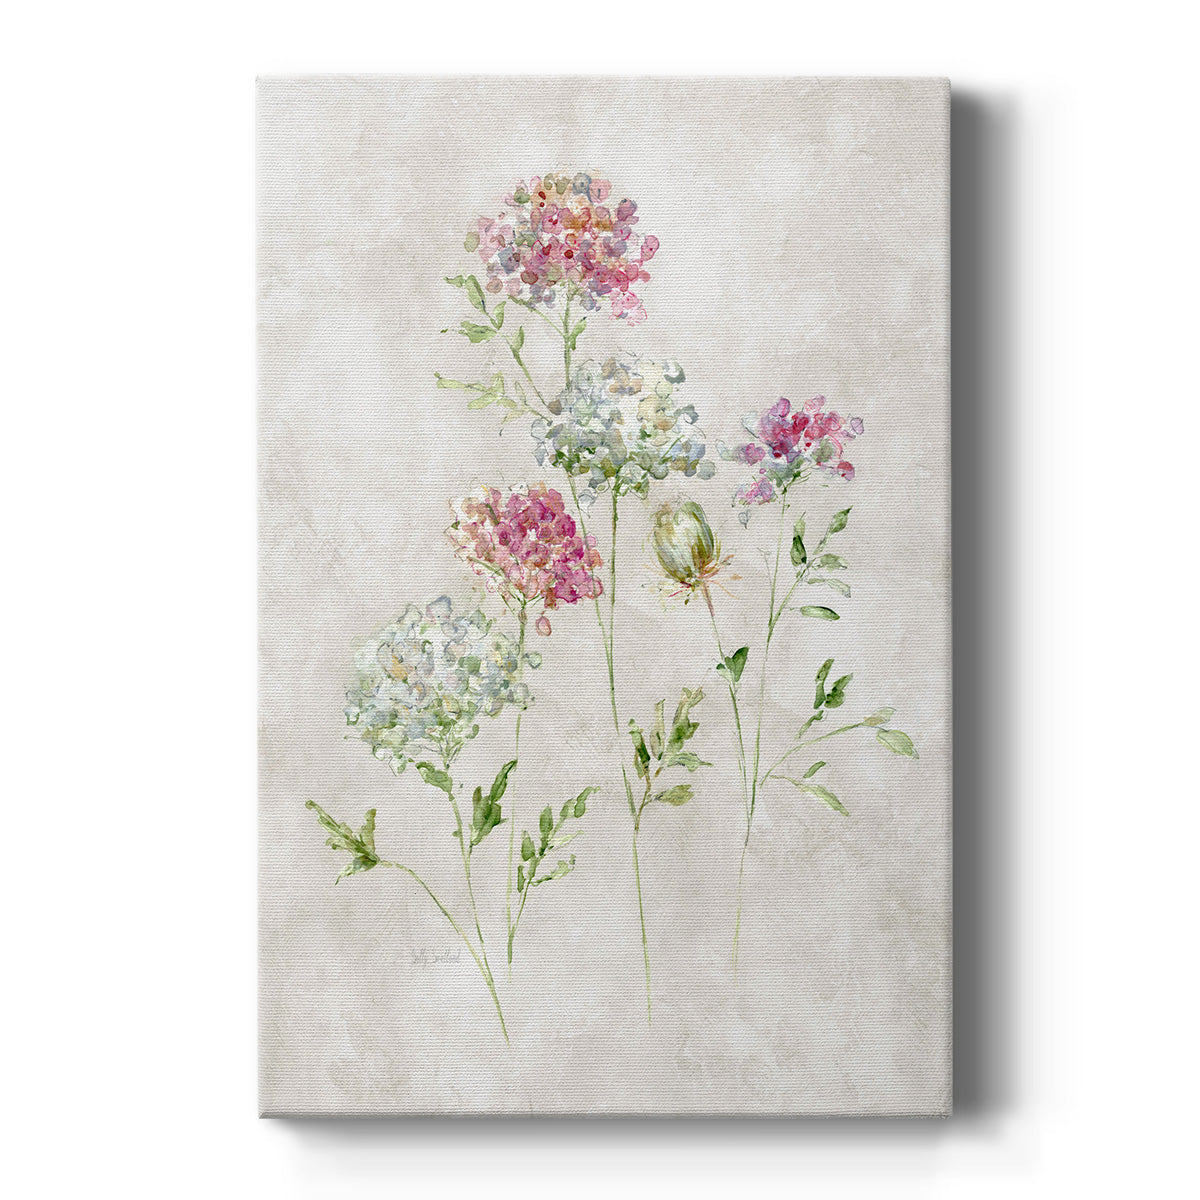 Soft Lace II Premium Gallery Wrapped Canvas - Ready to Hang